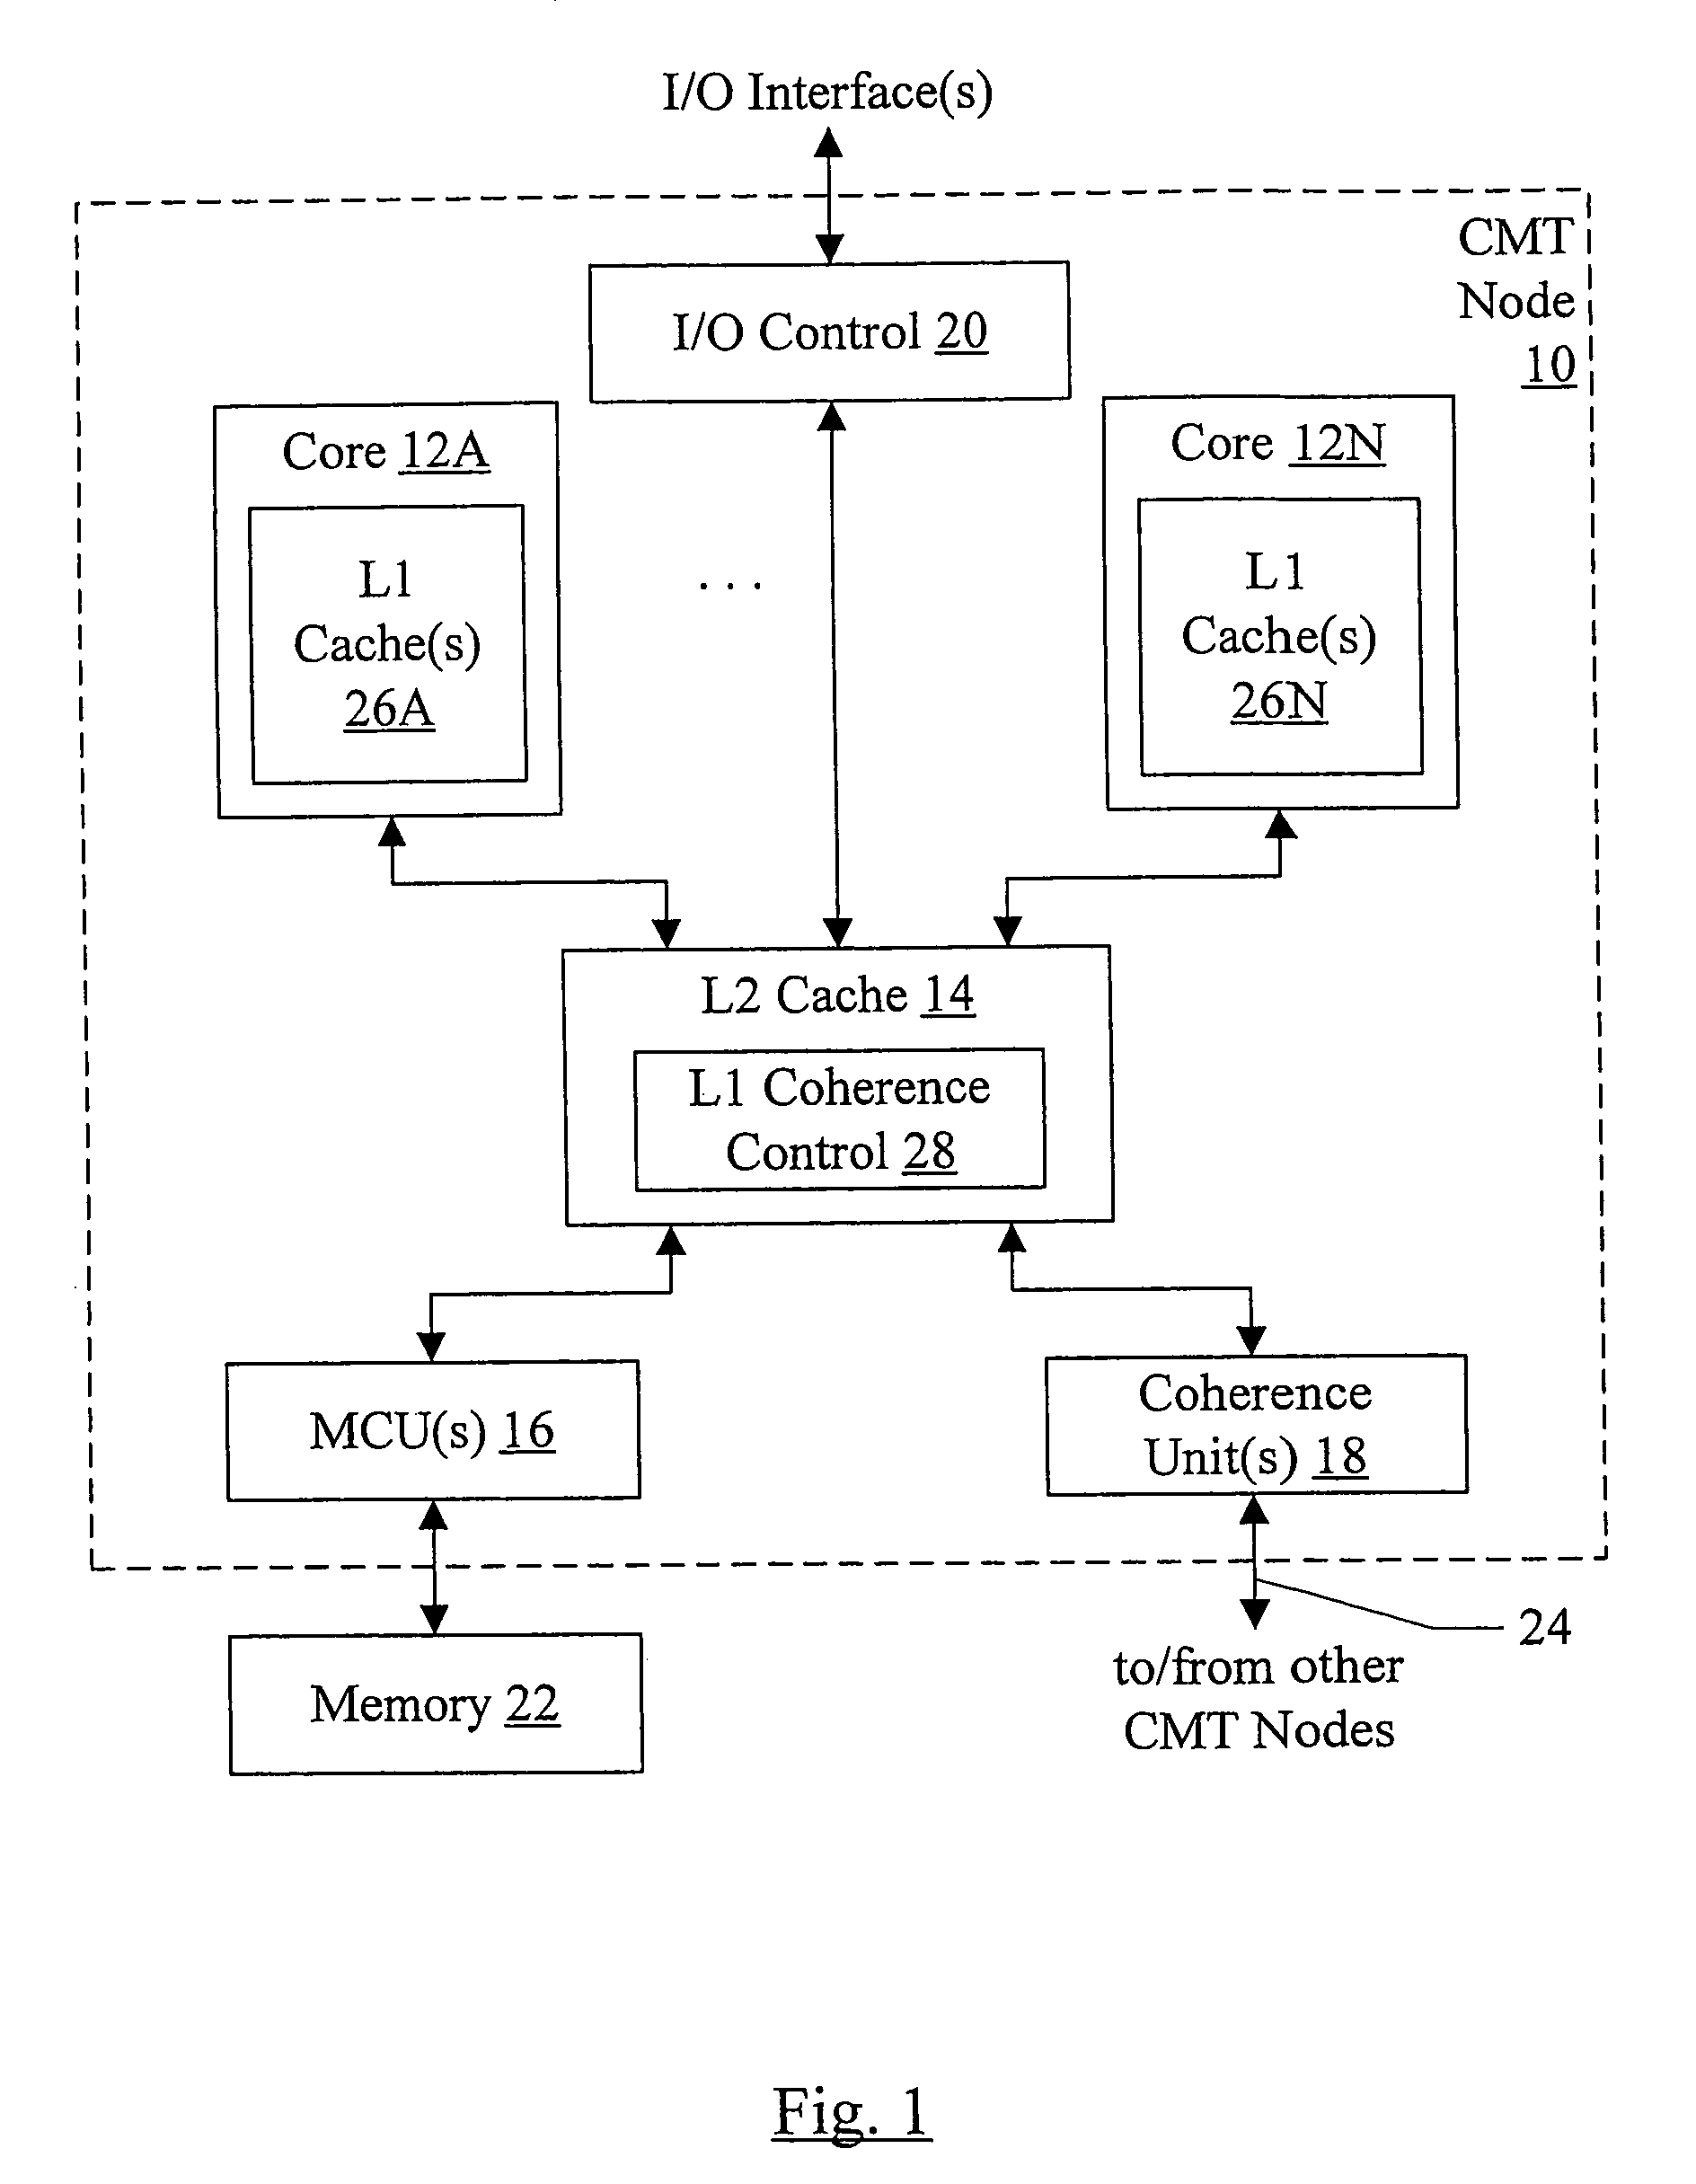 Multi-socket symmetric multiprocessing (SMP) system for chip multi-threaded (CMT) processors